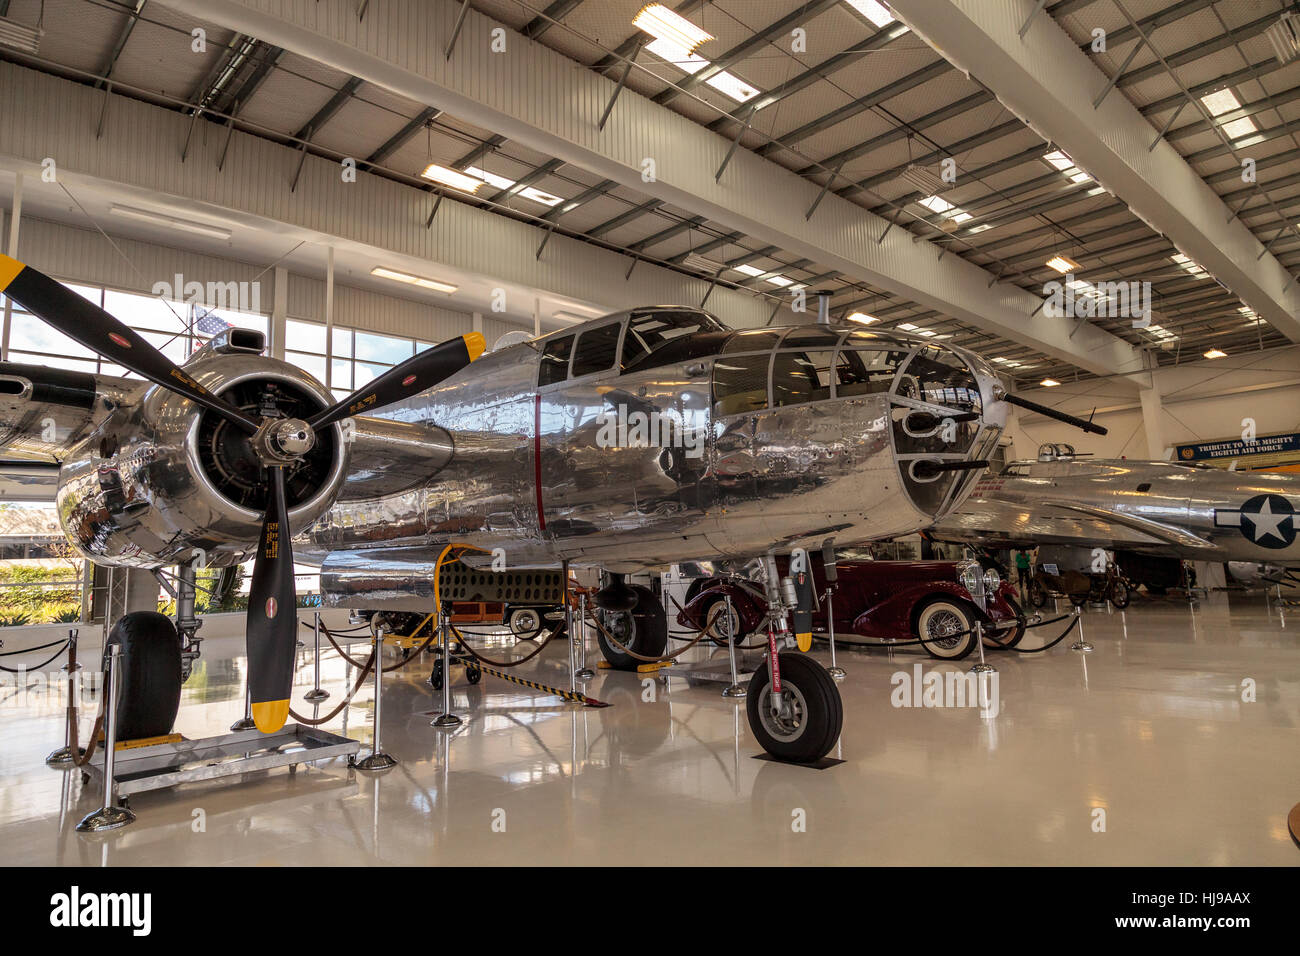 North American B-25 bomber called Mitchell displayed at the Lyon Air Museum  in Santa Ana, California Stock Photo - Alamy